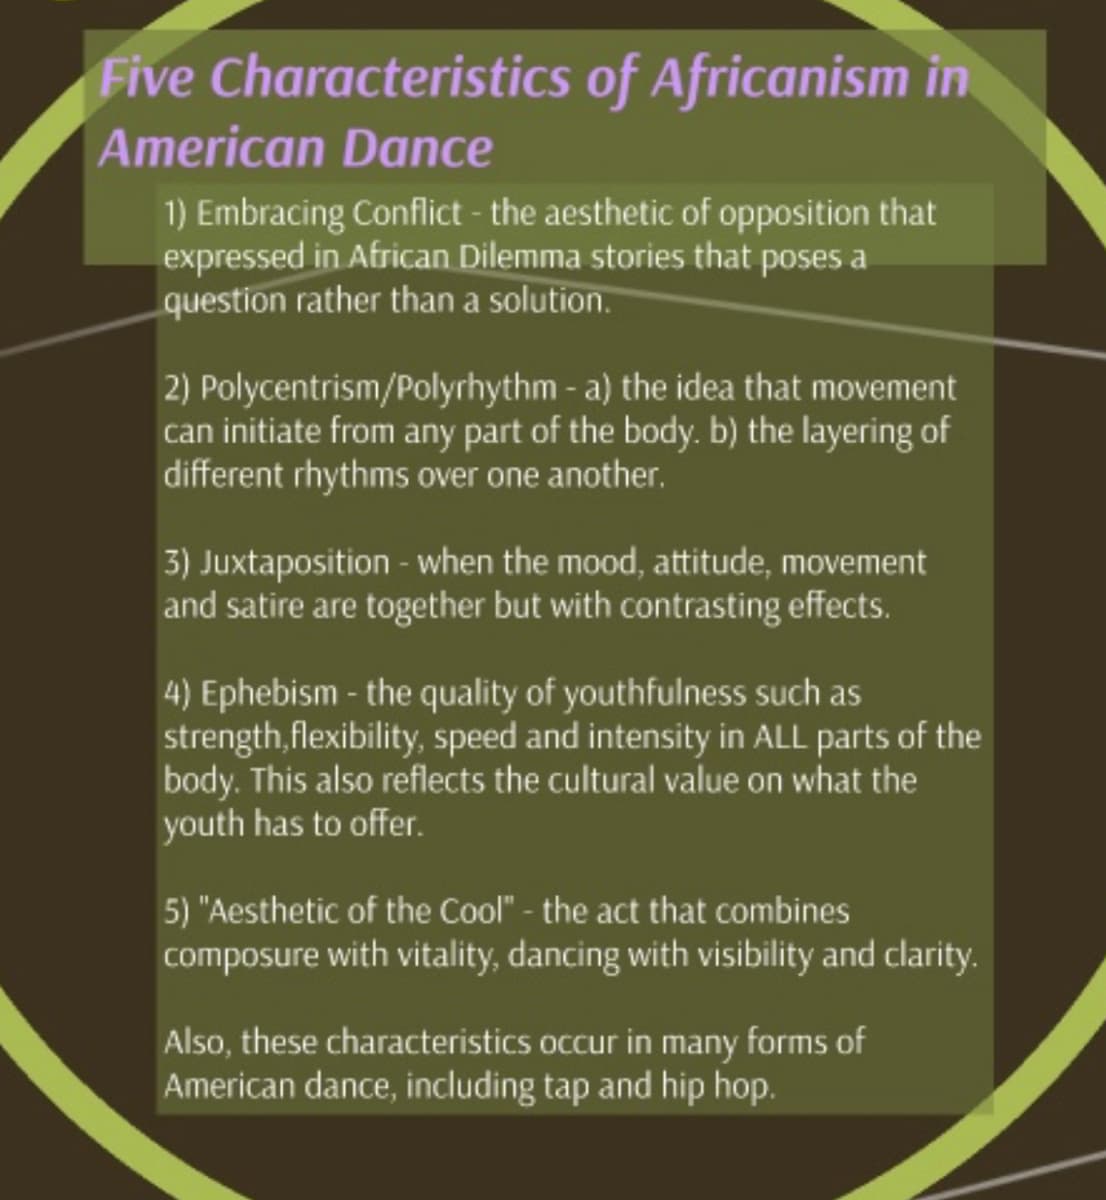 Five Characteristics of Africanism in
American Dance
1) Embracing Conflict - the aesthetic of opposition that
expressed in African Dilemma stories that poses a
question rather than a solution.
2) Polycentrism/Polyrhythm - a) the idea that movement
can initiate from any part of the body. b) the layering of
different rhythms over one another.
3) Juxtaposition - when the mood, attitude, movement
and satire are together but with contrasting effects.
4) Ephebism - the quality of youthfulness such as
strength, flexibility, speed and intensity in ALL parts of the
body. This also reflects the cultural value on what the
youth has to offer.
5) "Aesthetic of the Cool" - the act that combines
composure with vitality, dancing with visibility and clarity.
Also, these characteristics occur in many forms of
American dance, including tap and hip hop.